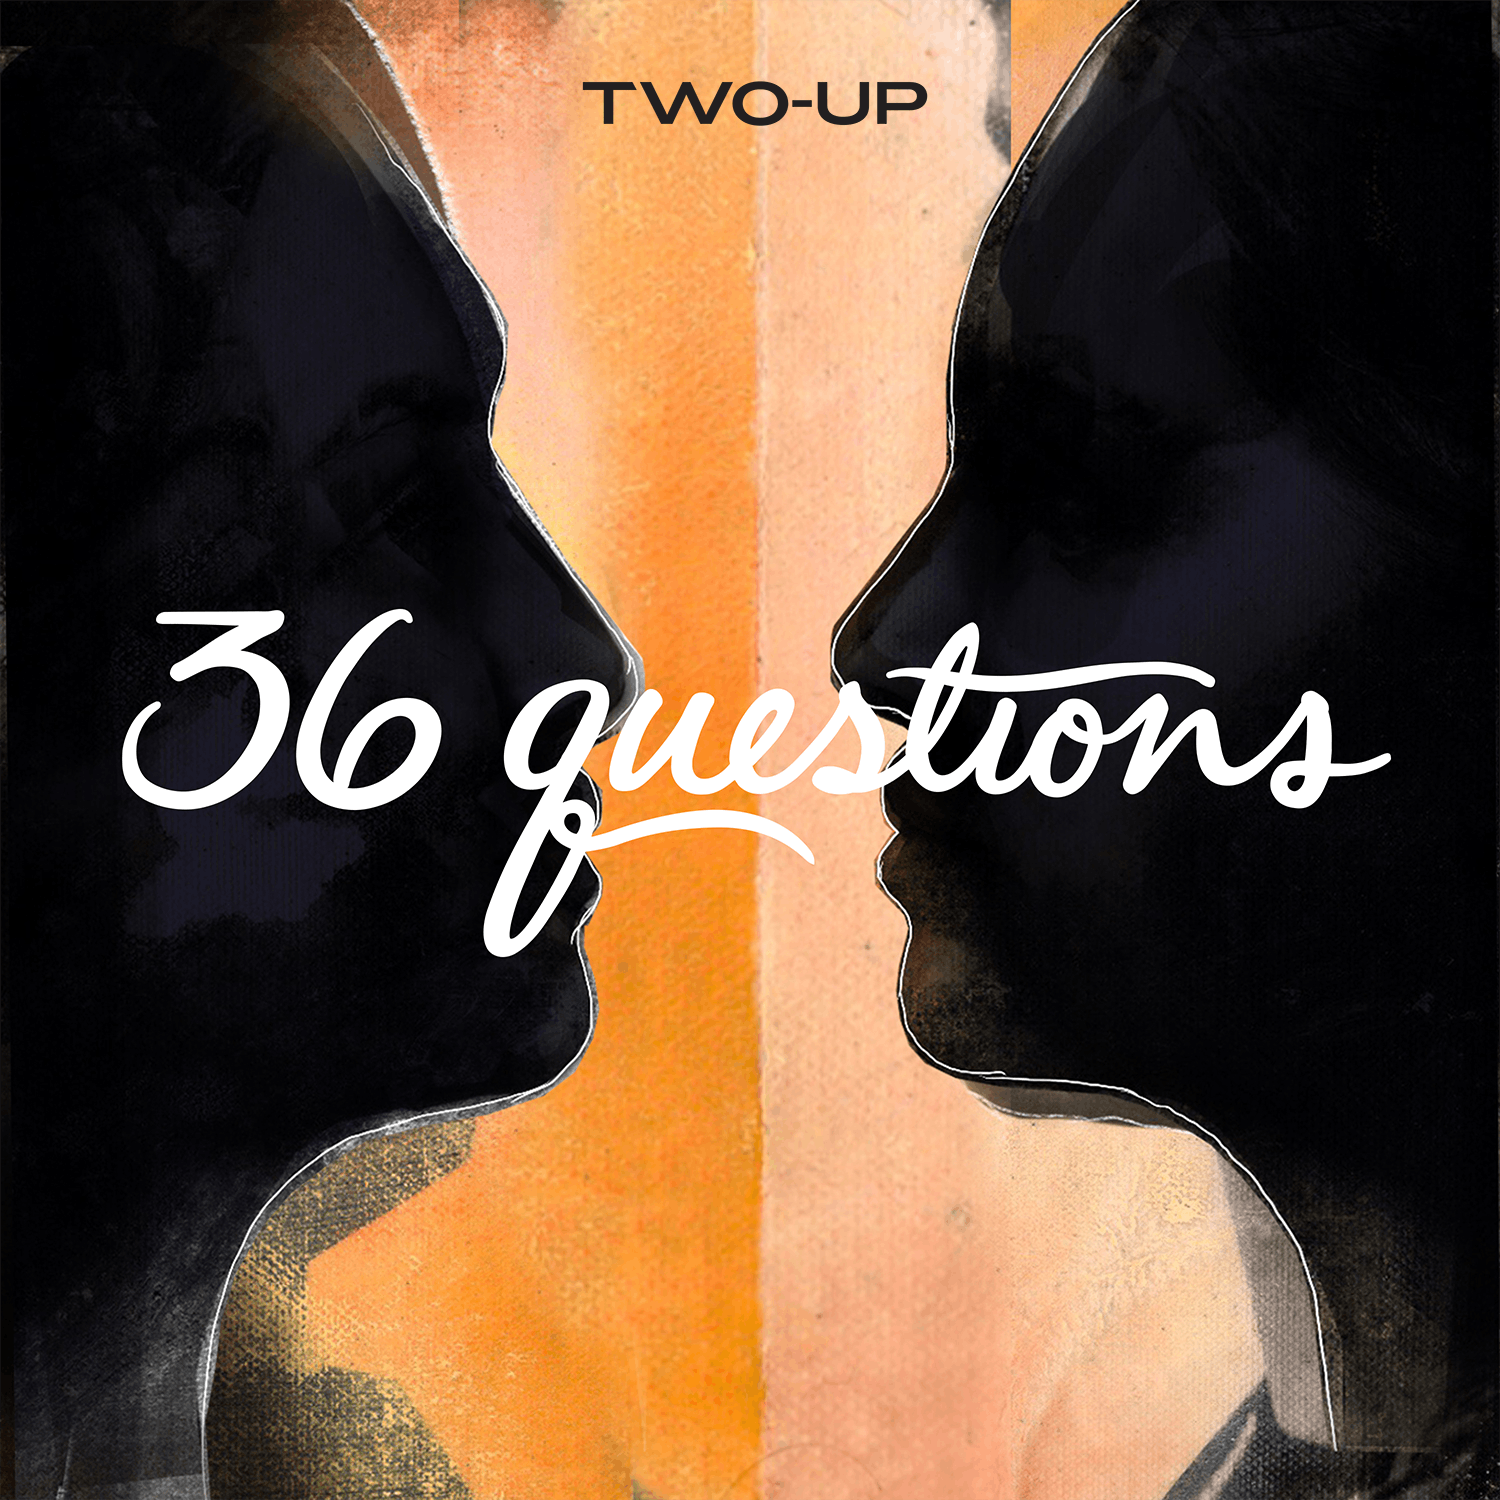 36 Questions – The Podcast Musical:Two-Up